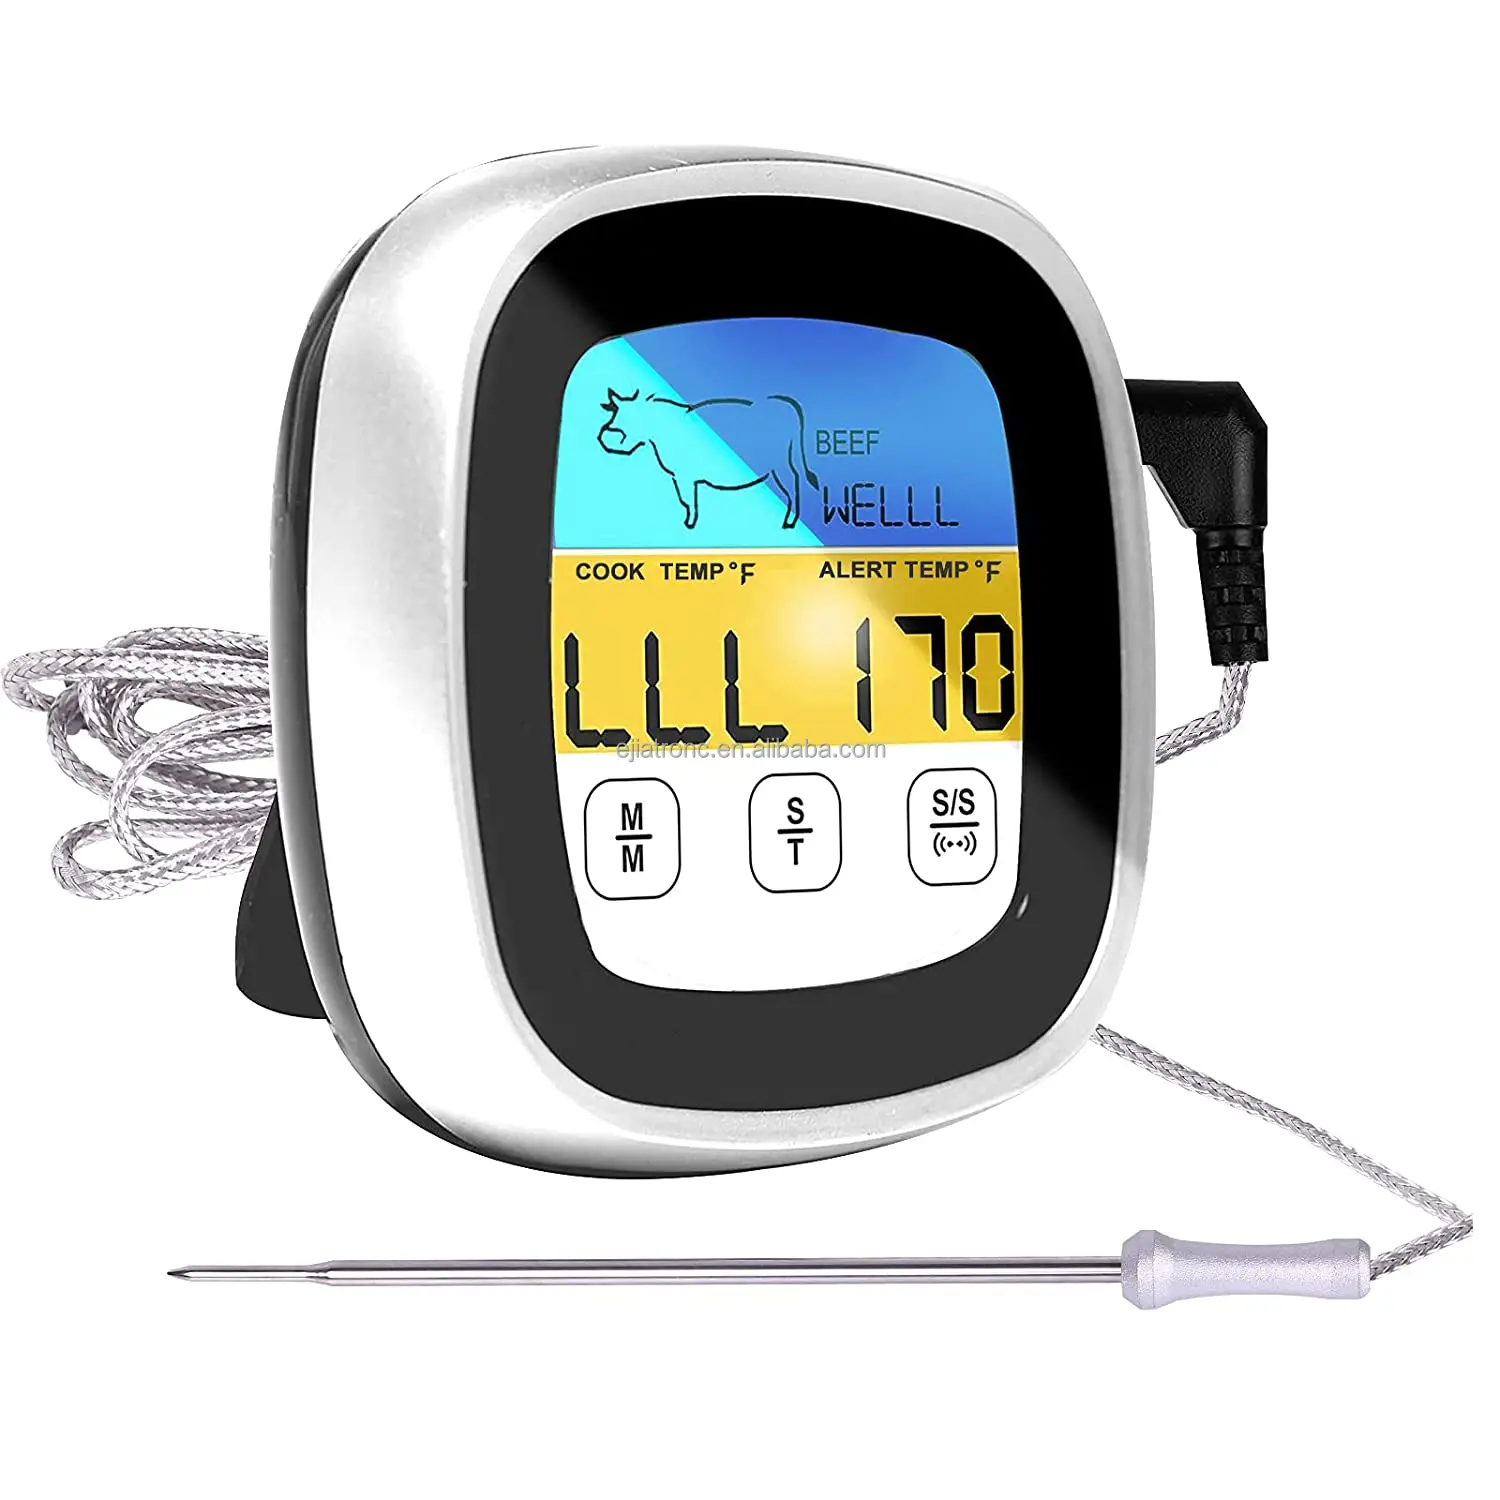 

Korean electric bbq grill Touch Button LCD Screen Digital Food Thermometer Cooking Thermometer with Timer Alert, Any pantone color and customized pakage is available.